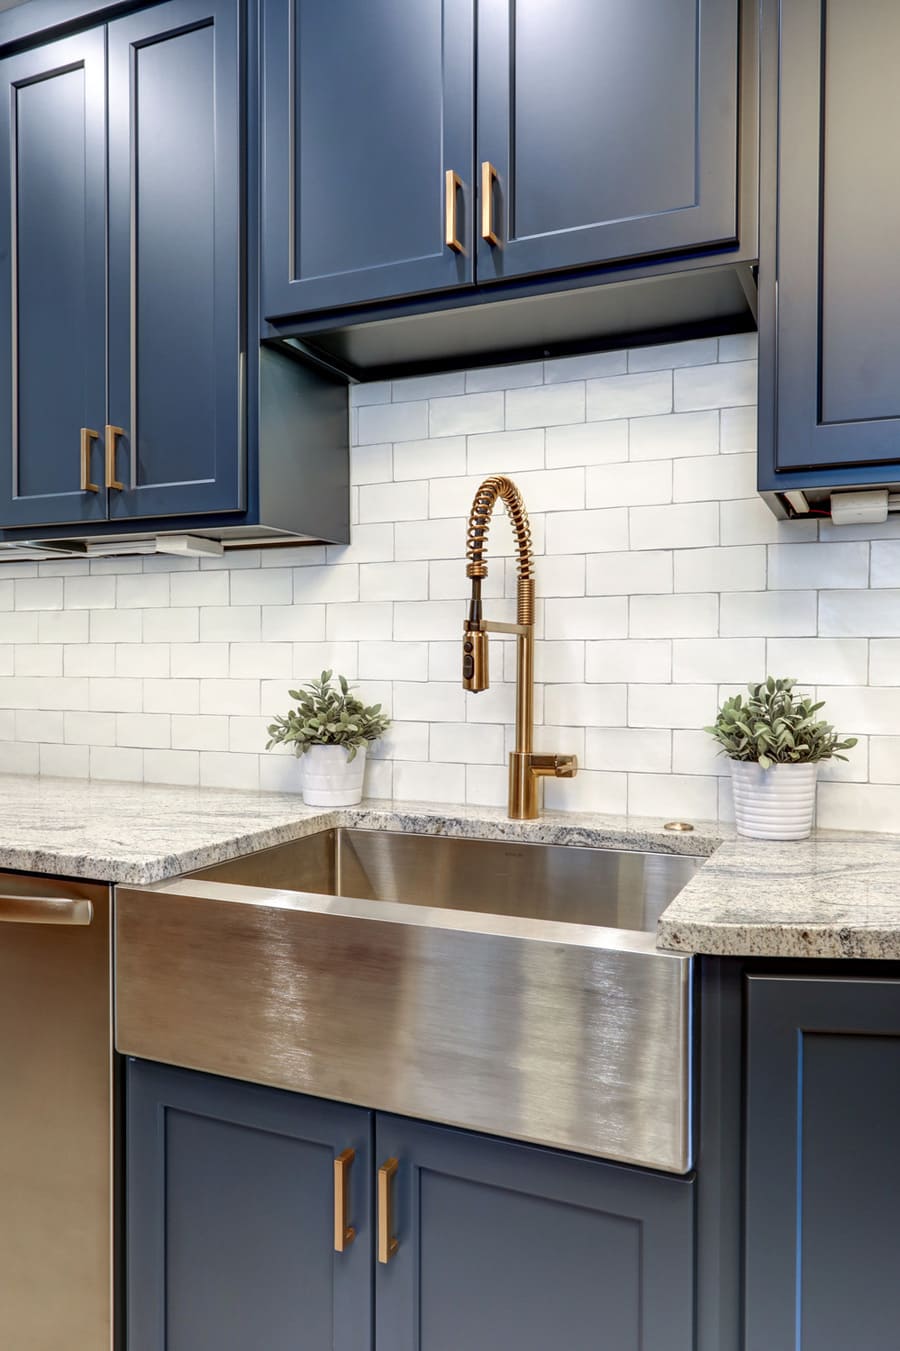 Mount Joy Kitchen Remodel with stainless steel sink and navy cabinets